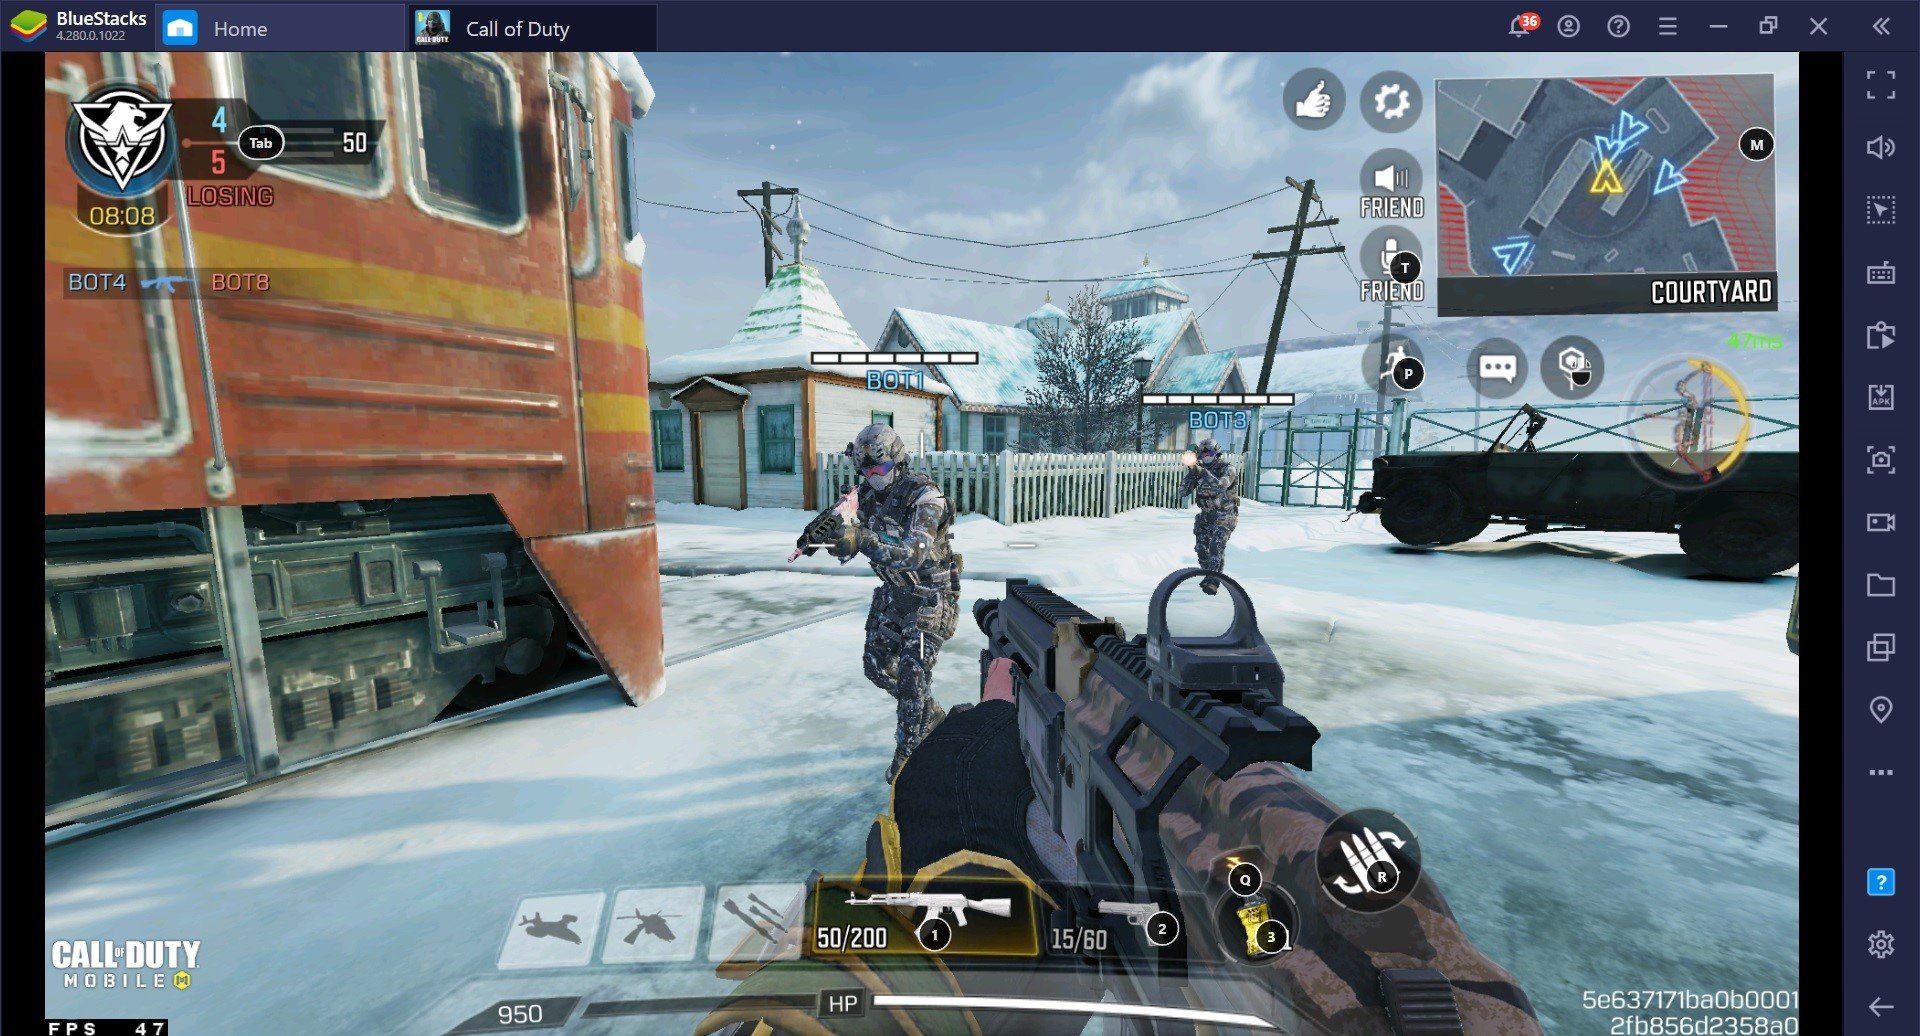 Call of Duty: Mobile Aim Guide 2021 - Hit Highlight Worthy Headshots